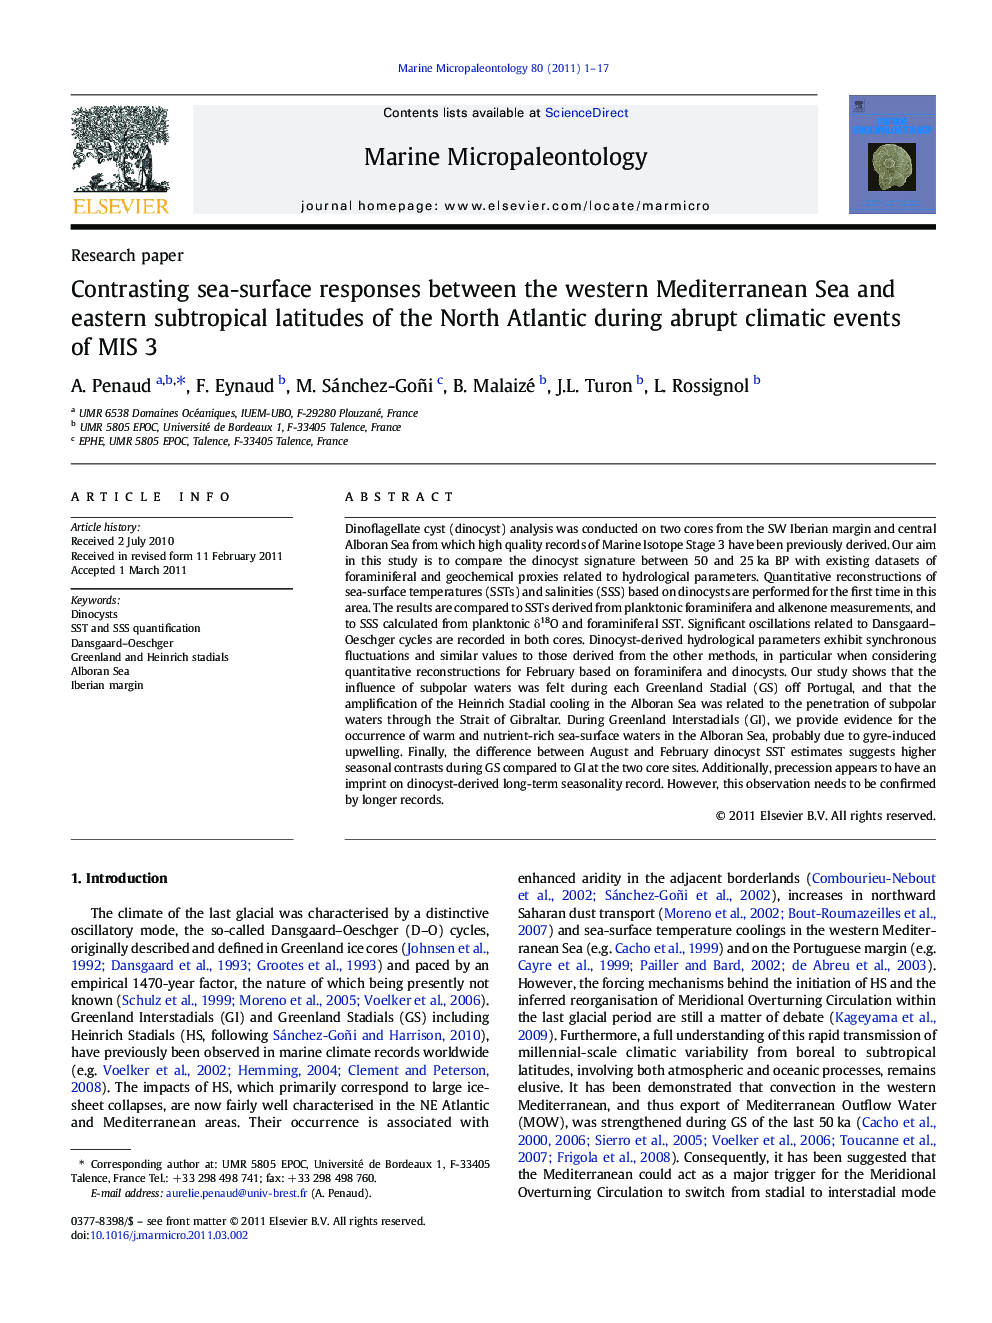 Contrasting sea-surface responses between the western Mediterranean Sea and eastern subtropical latitudes of the North Atlantic during abrupt climatic events of MIS 3